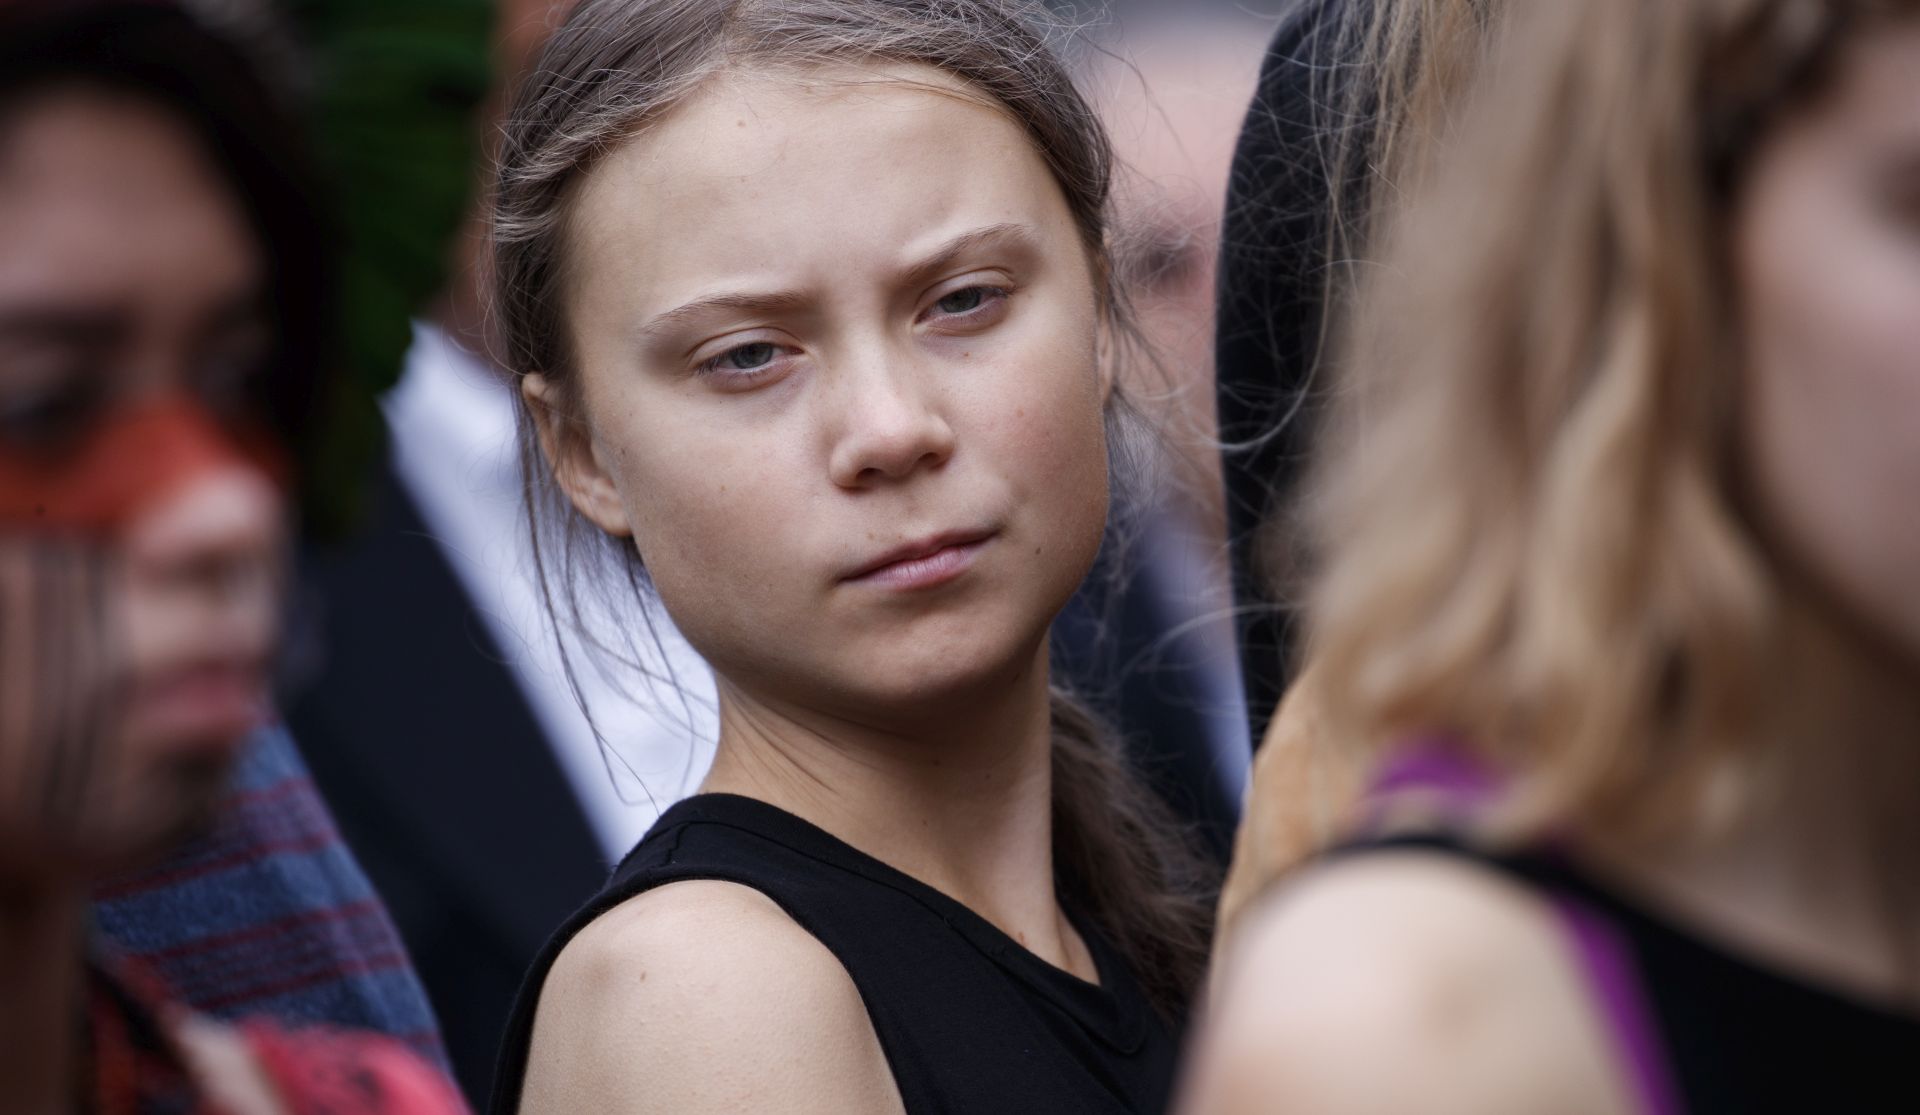 epa07848814 Greta Thunberg, the 16 year old climate change activist from Sweden, attends a Senate Climate Change Task Force press conference at the US Capitol in Washington, DC, USA, 17 September 2019. The press conference kicks off a week of activities culminating in a climate strike Friday, 20 September, in which workers and students around the world will walk out to demand more action to fight global warming.  EPA/SHAWN THEW